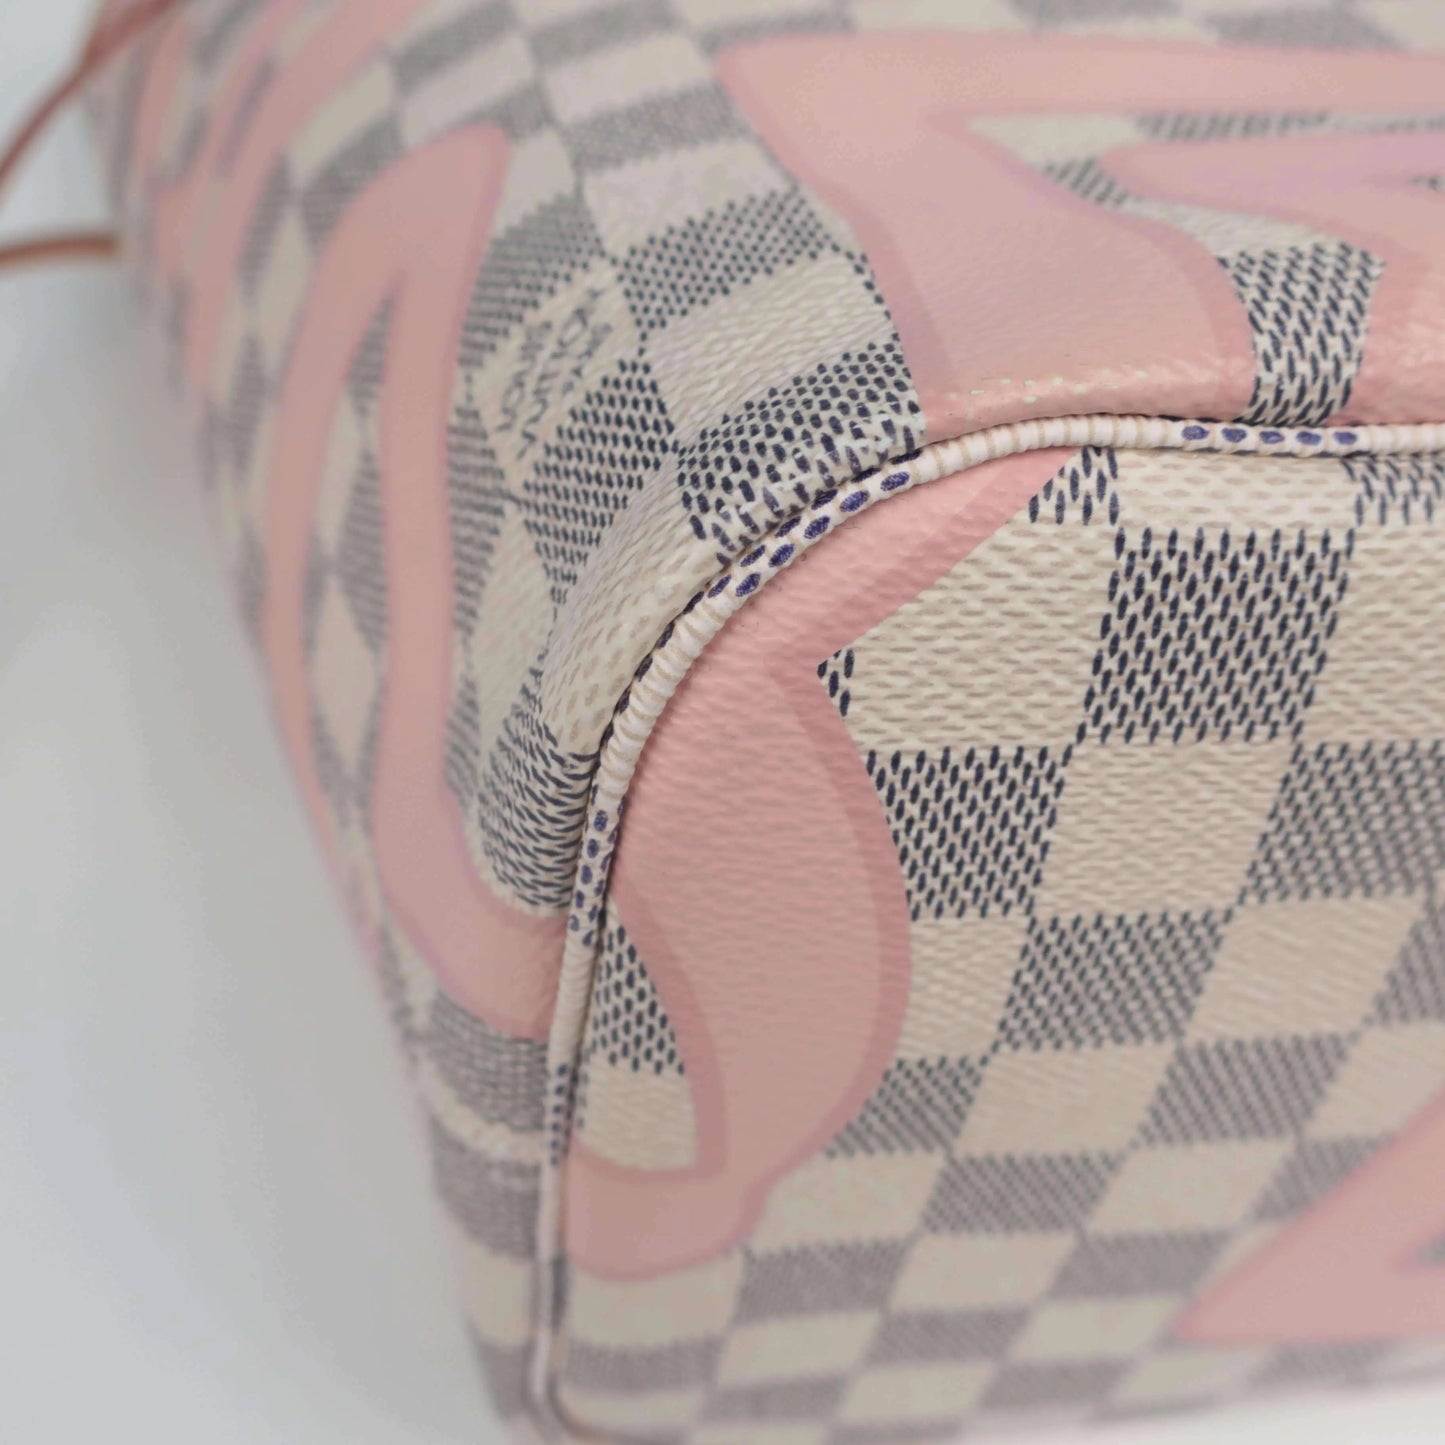 Load image into Gallery viewer, Louis Vuitton Louis Vuitton Tahitienne Neverfull MM with Pouch LVBagaholic
